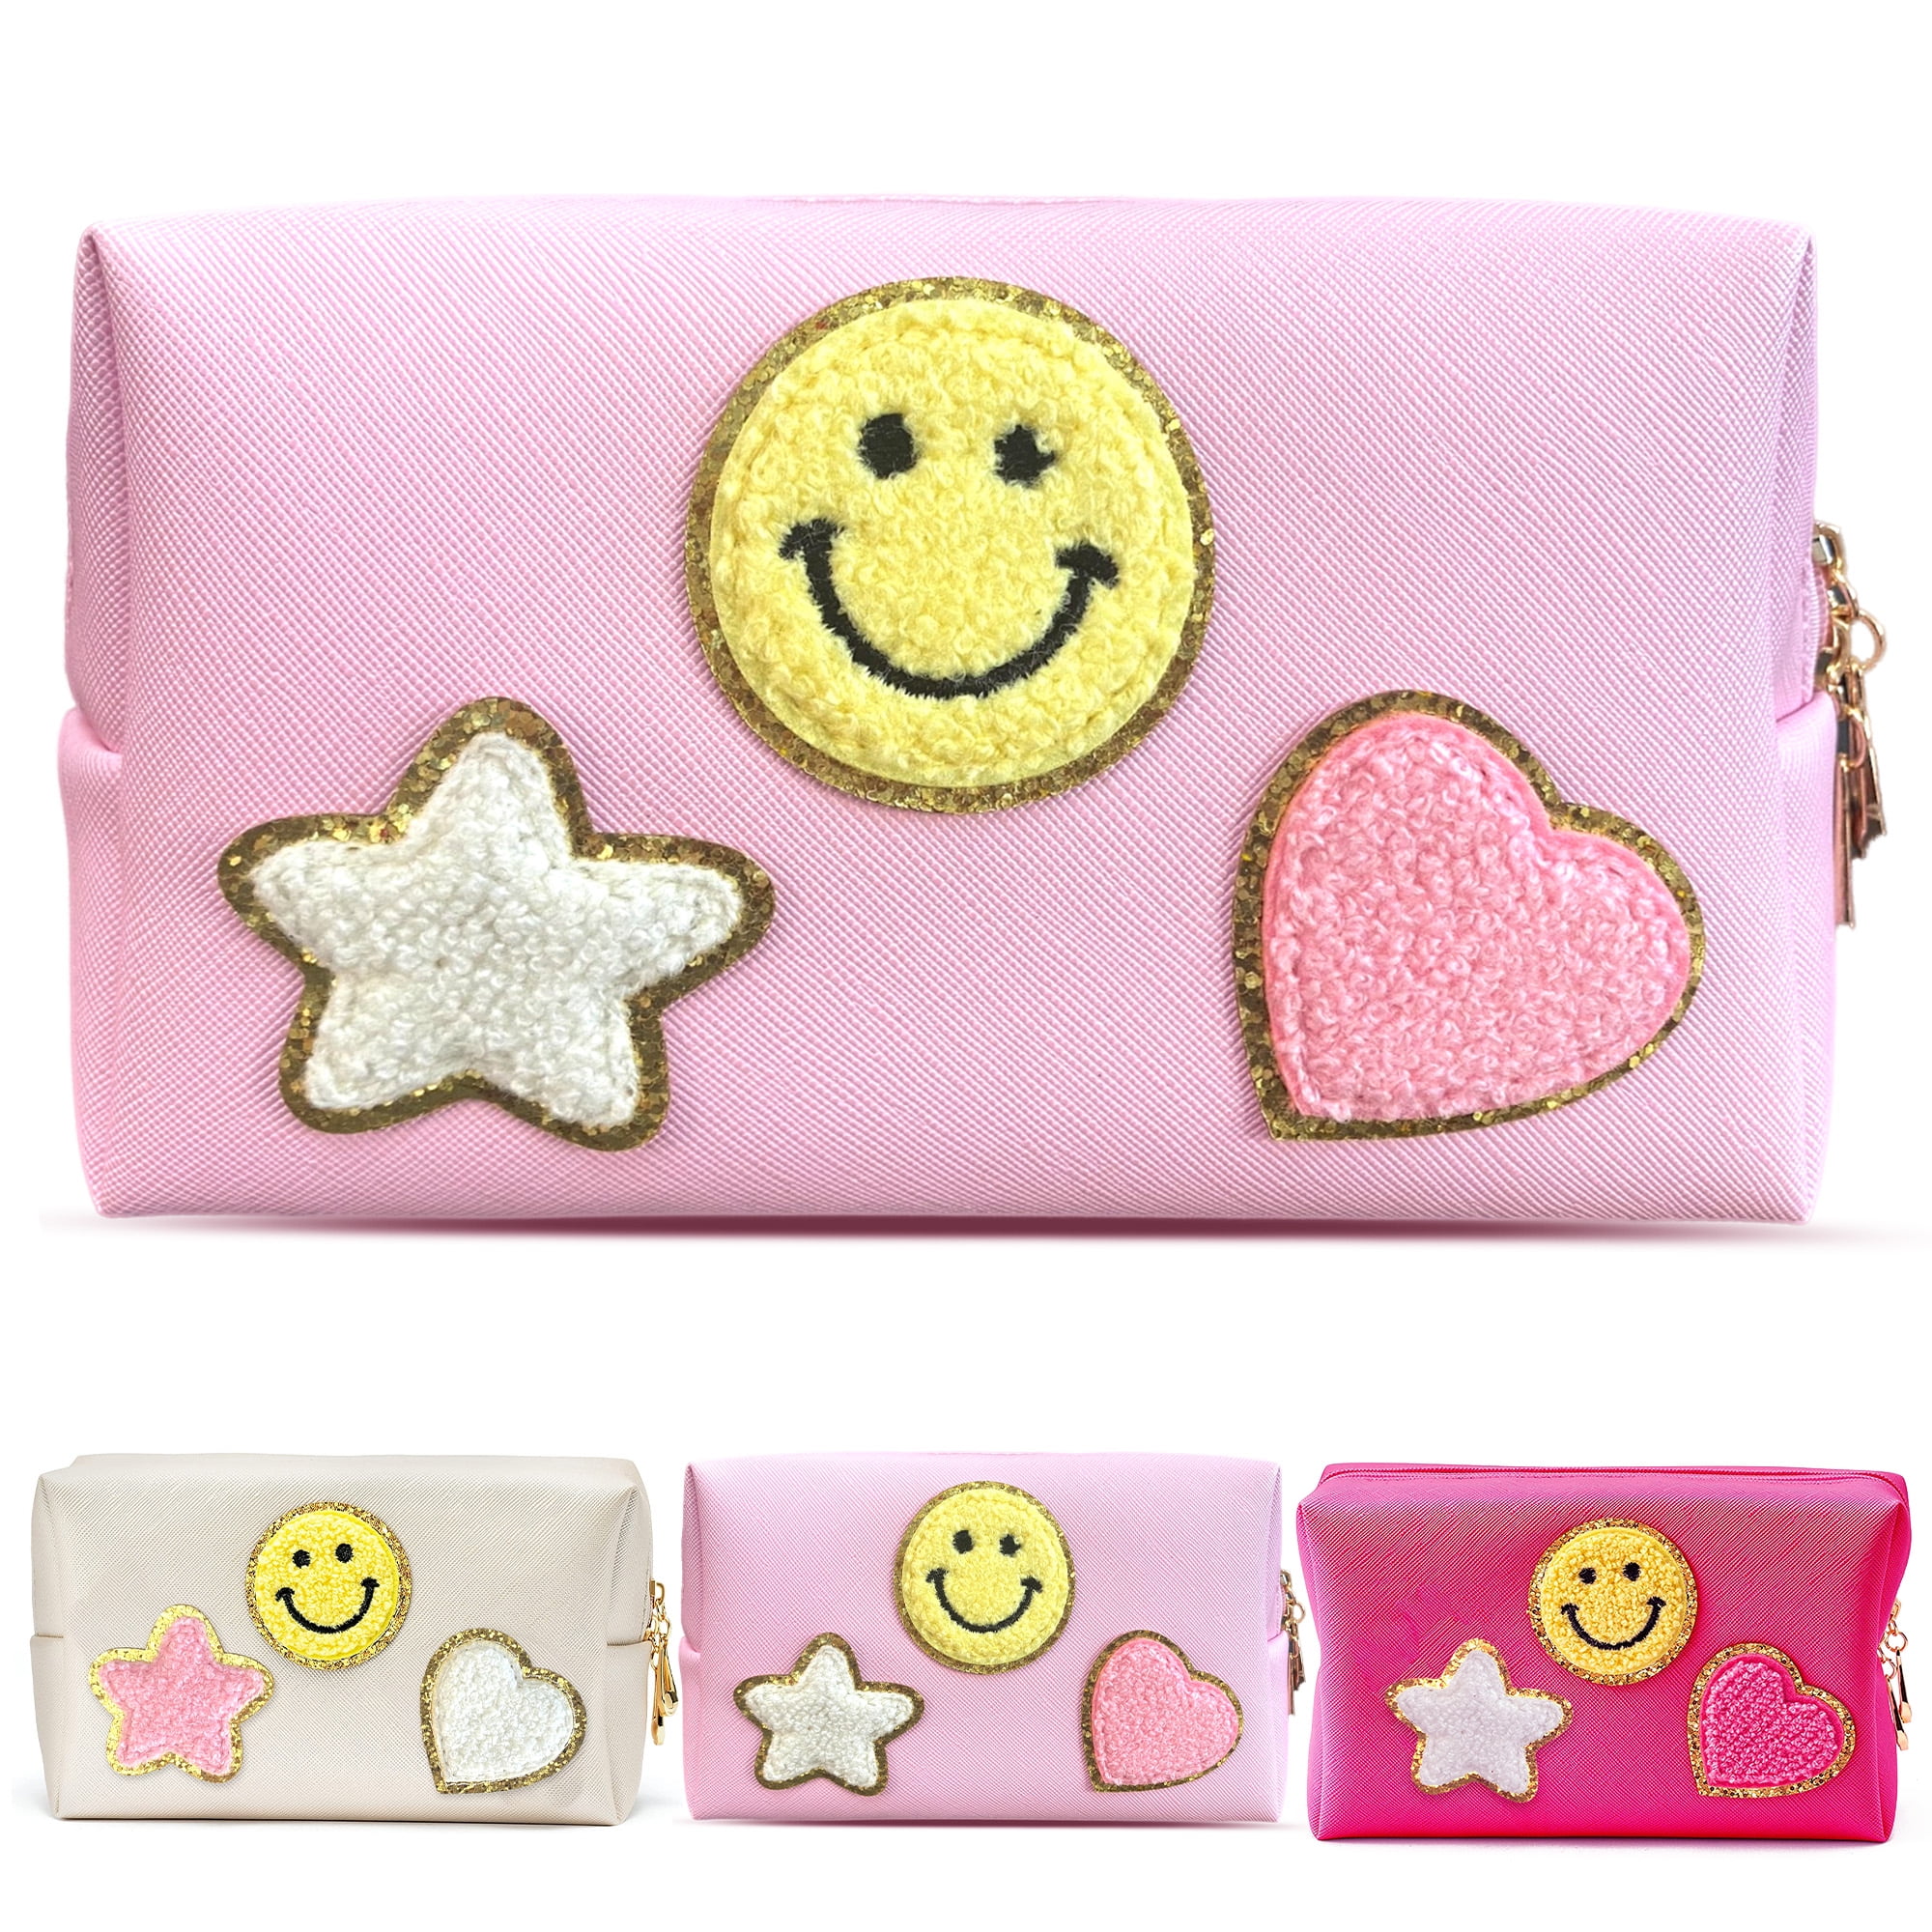 Preppy Patch Small Toiletry Bag Smile Lightning Heart Pu Leather